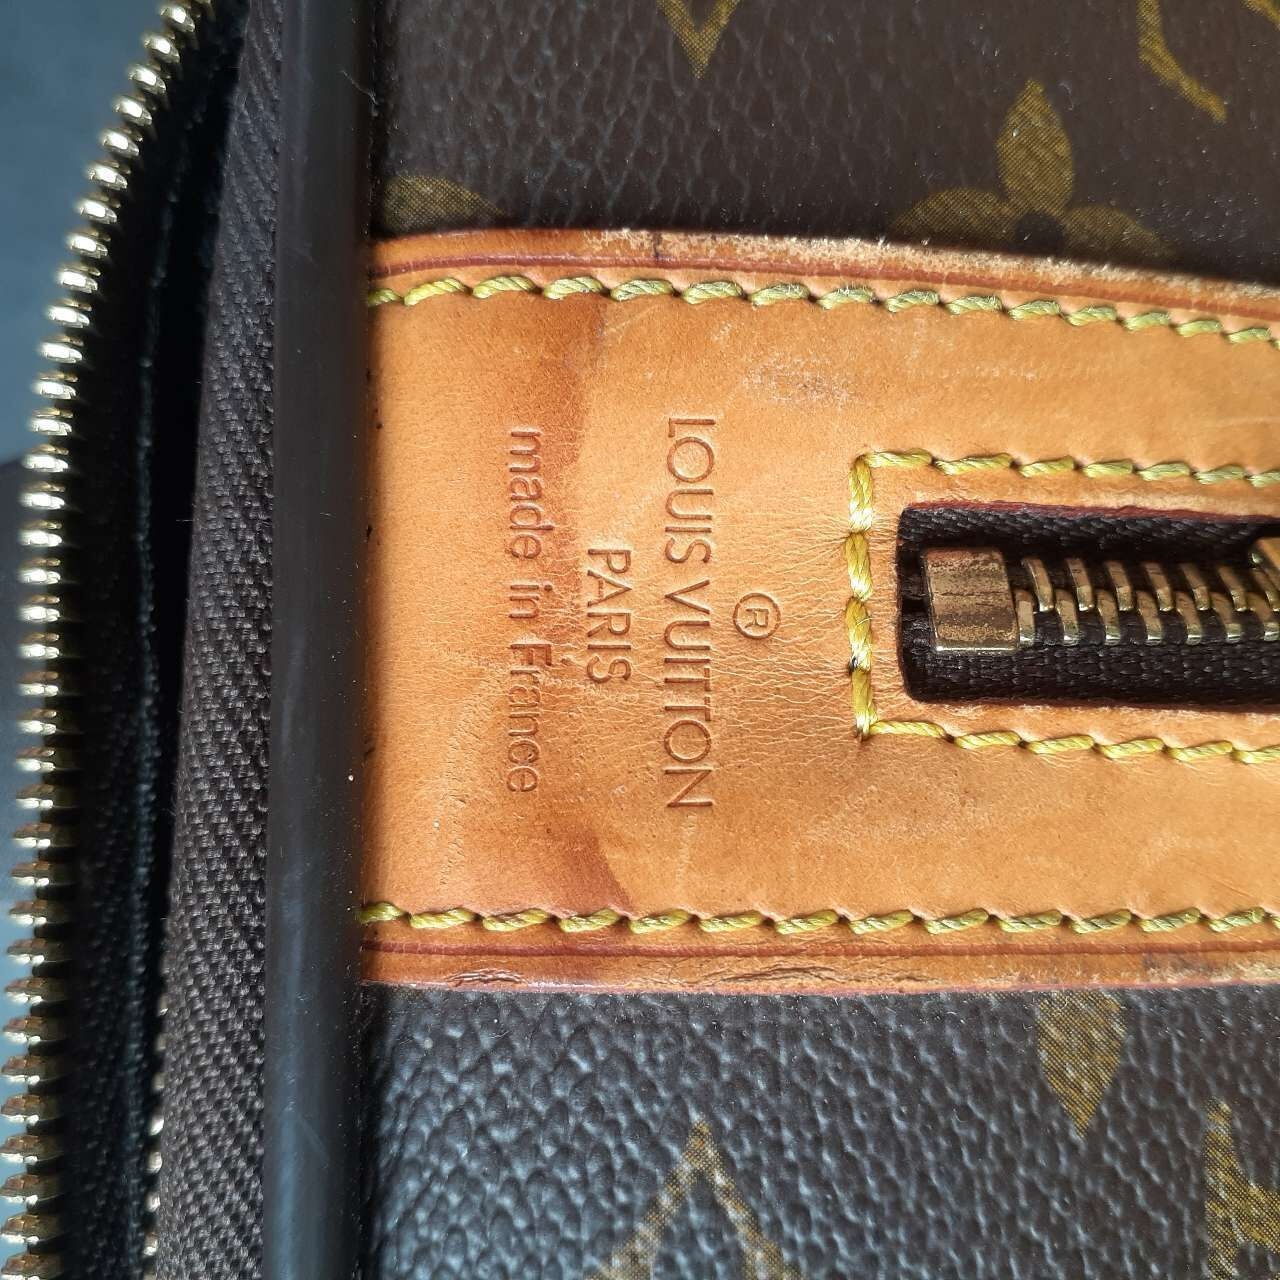 Louis Vuitton Bosphore Brown Luggage and Travel